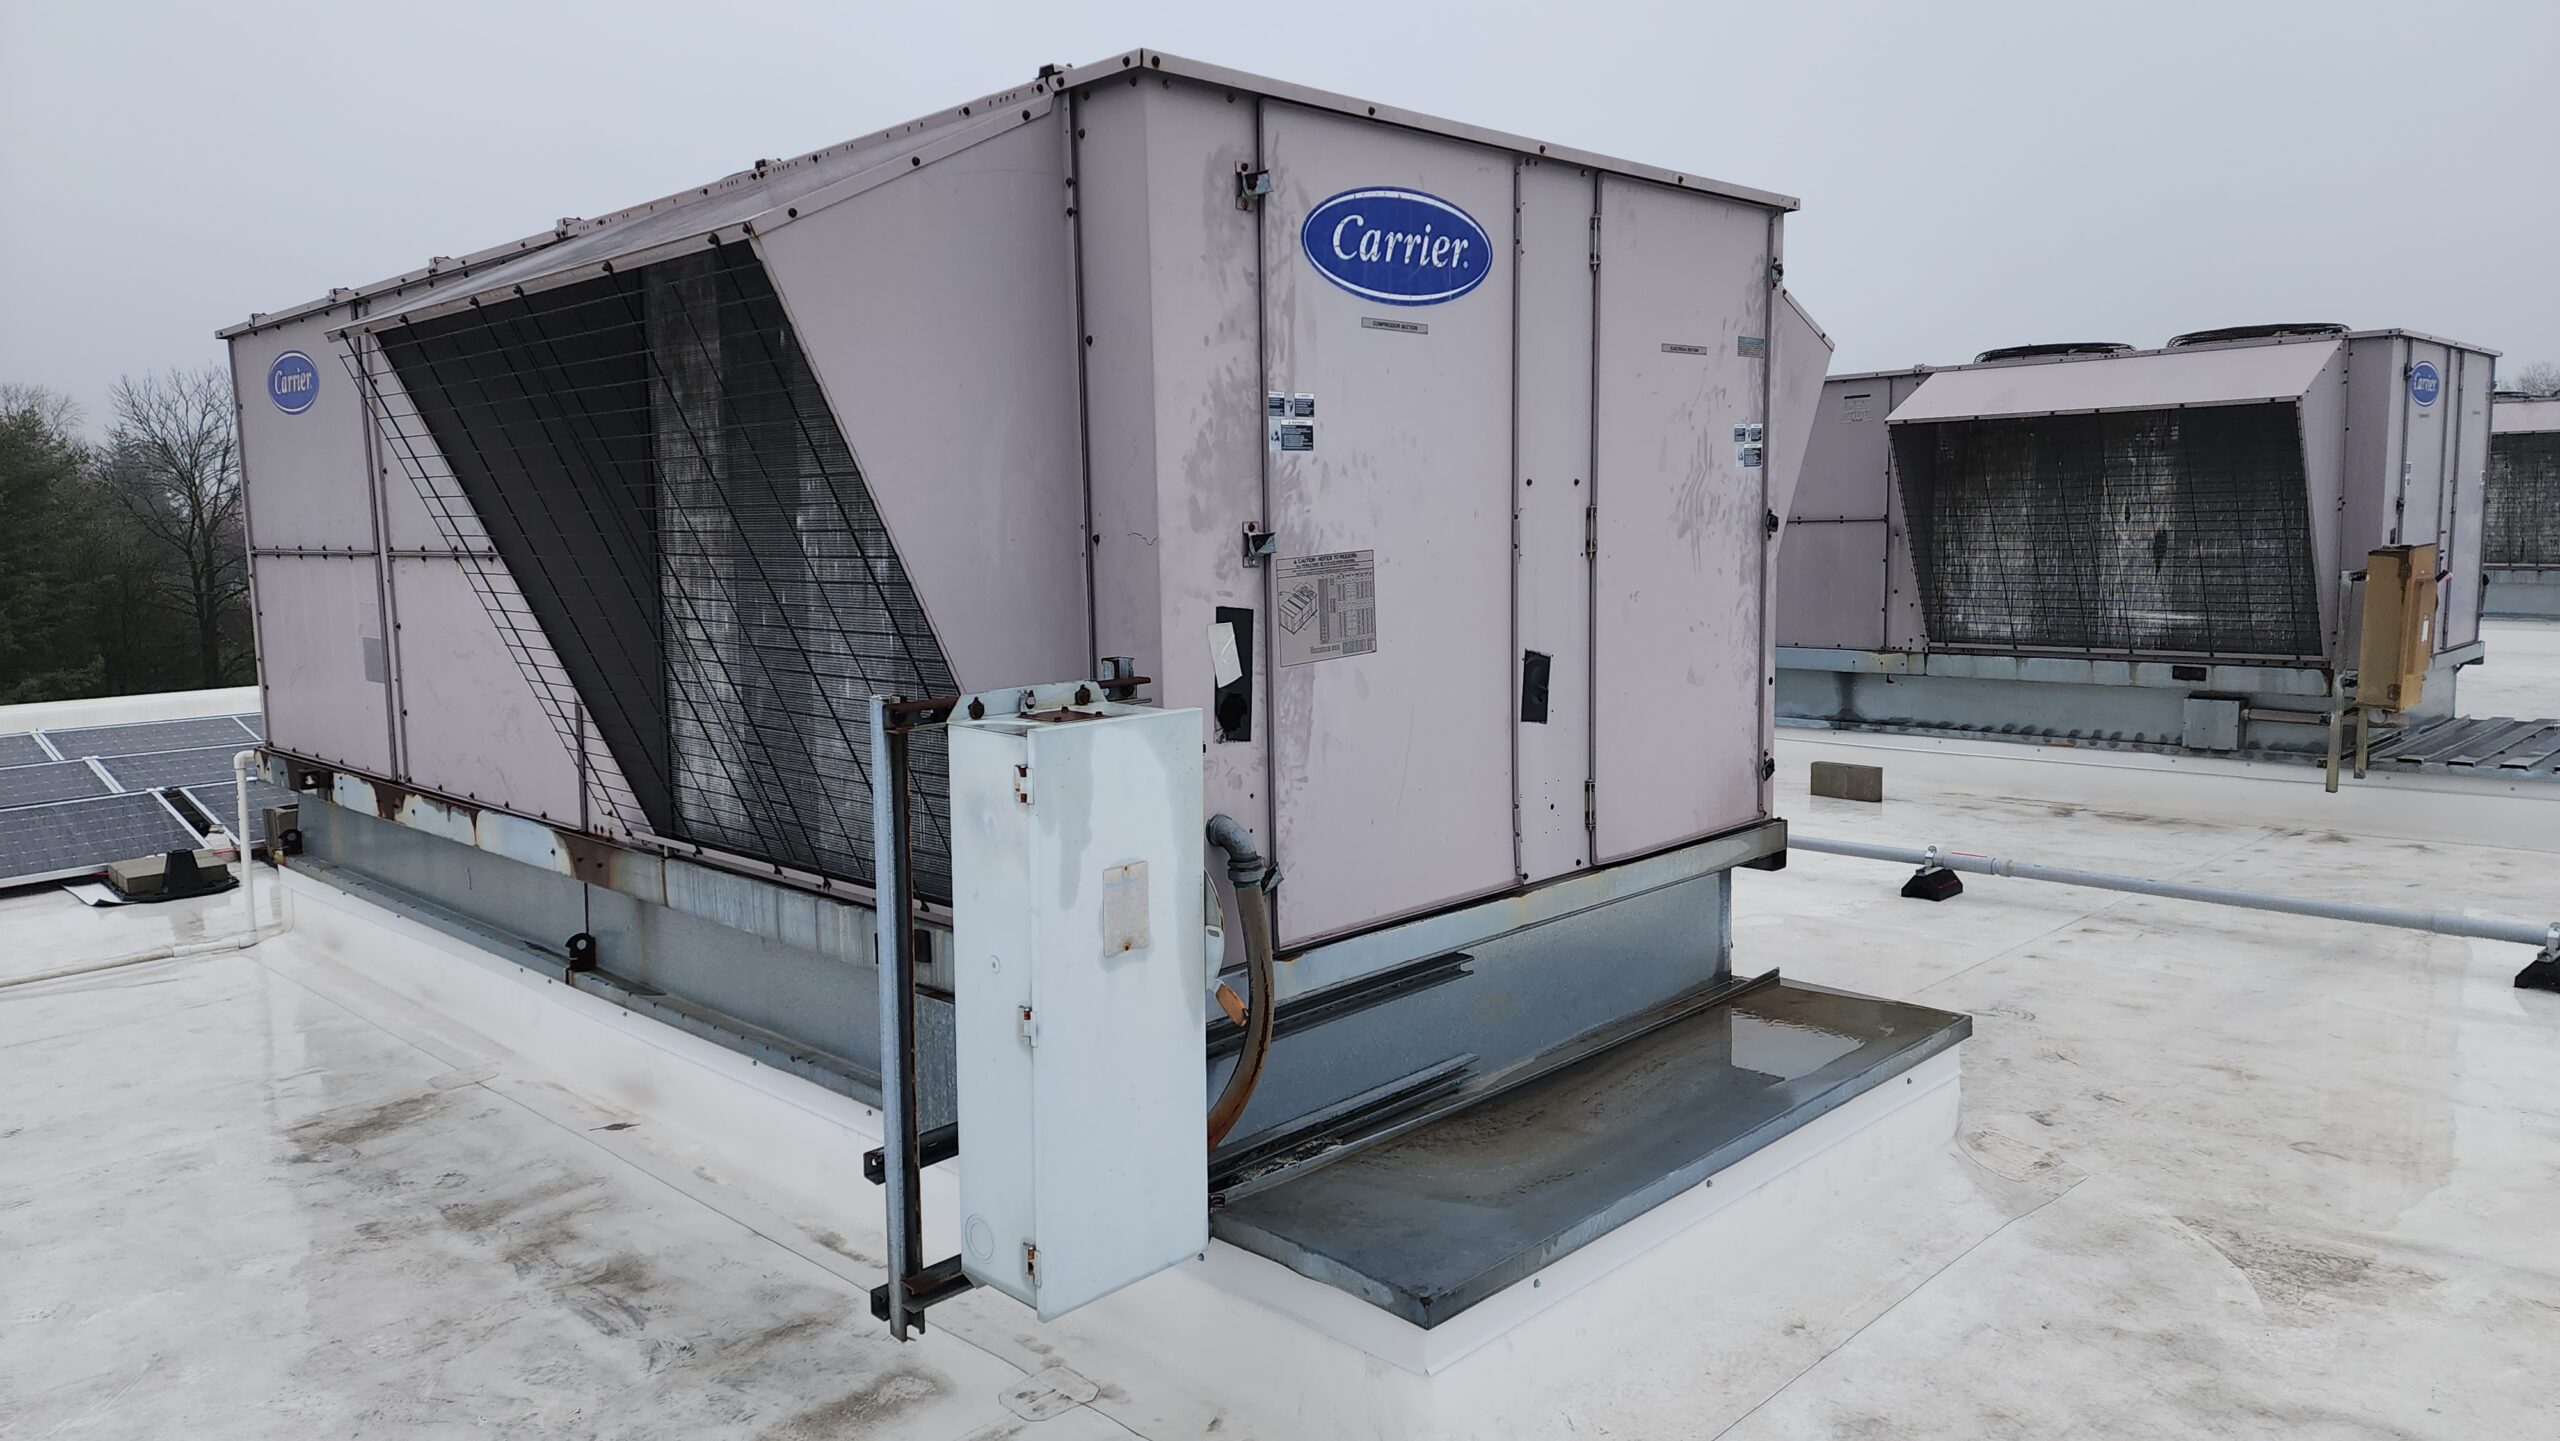 Is a Rooftop Unit Right for Your Building? Why They’re So Popular Now